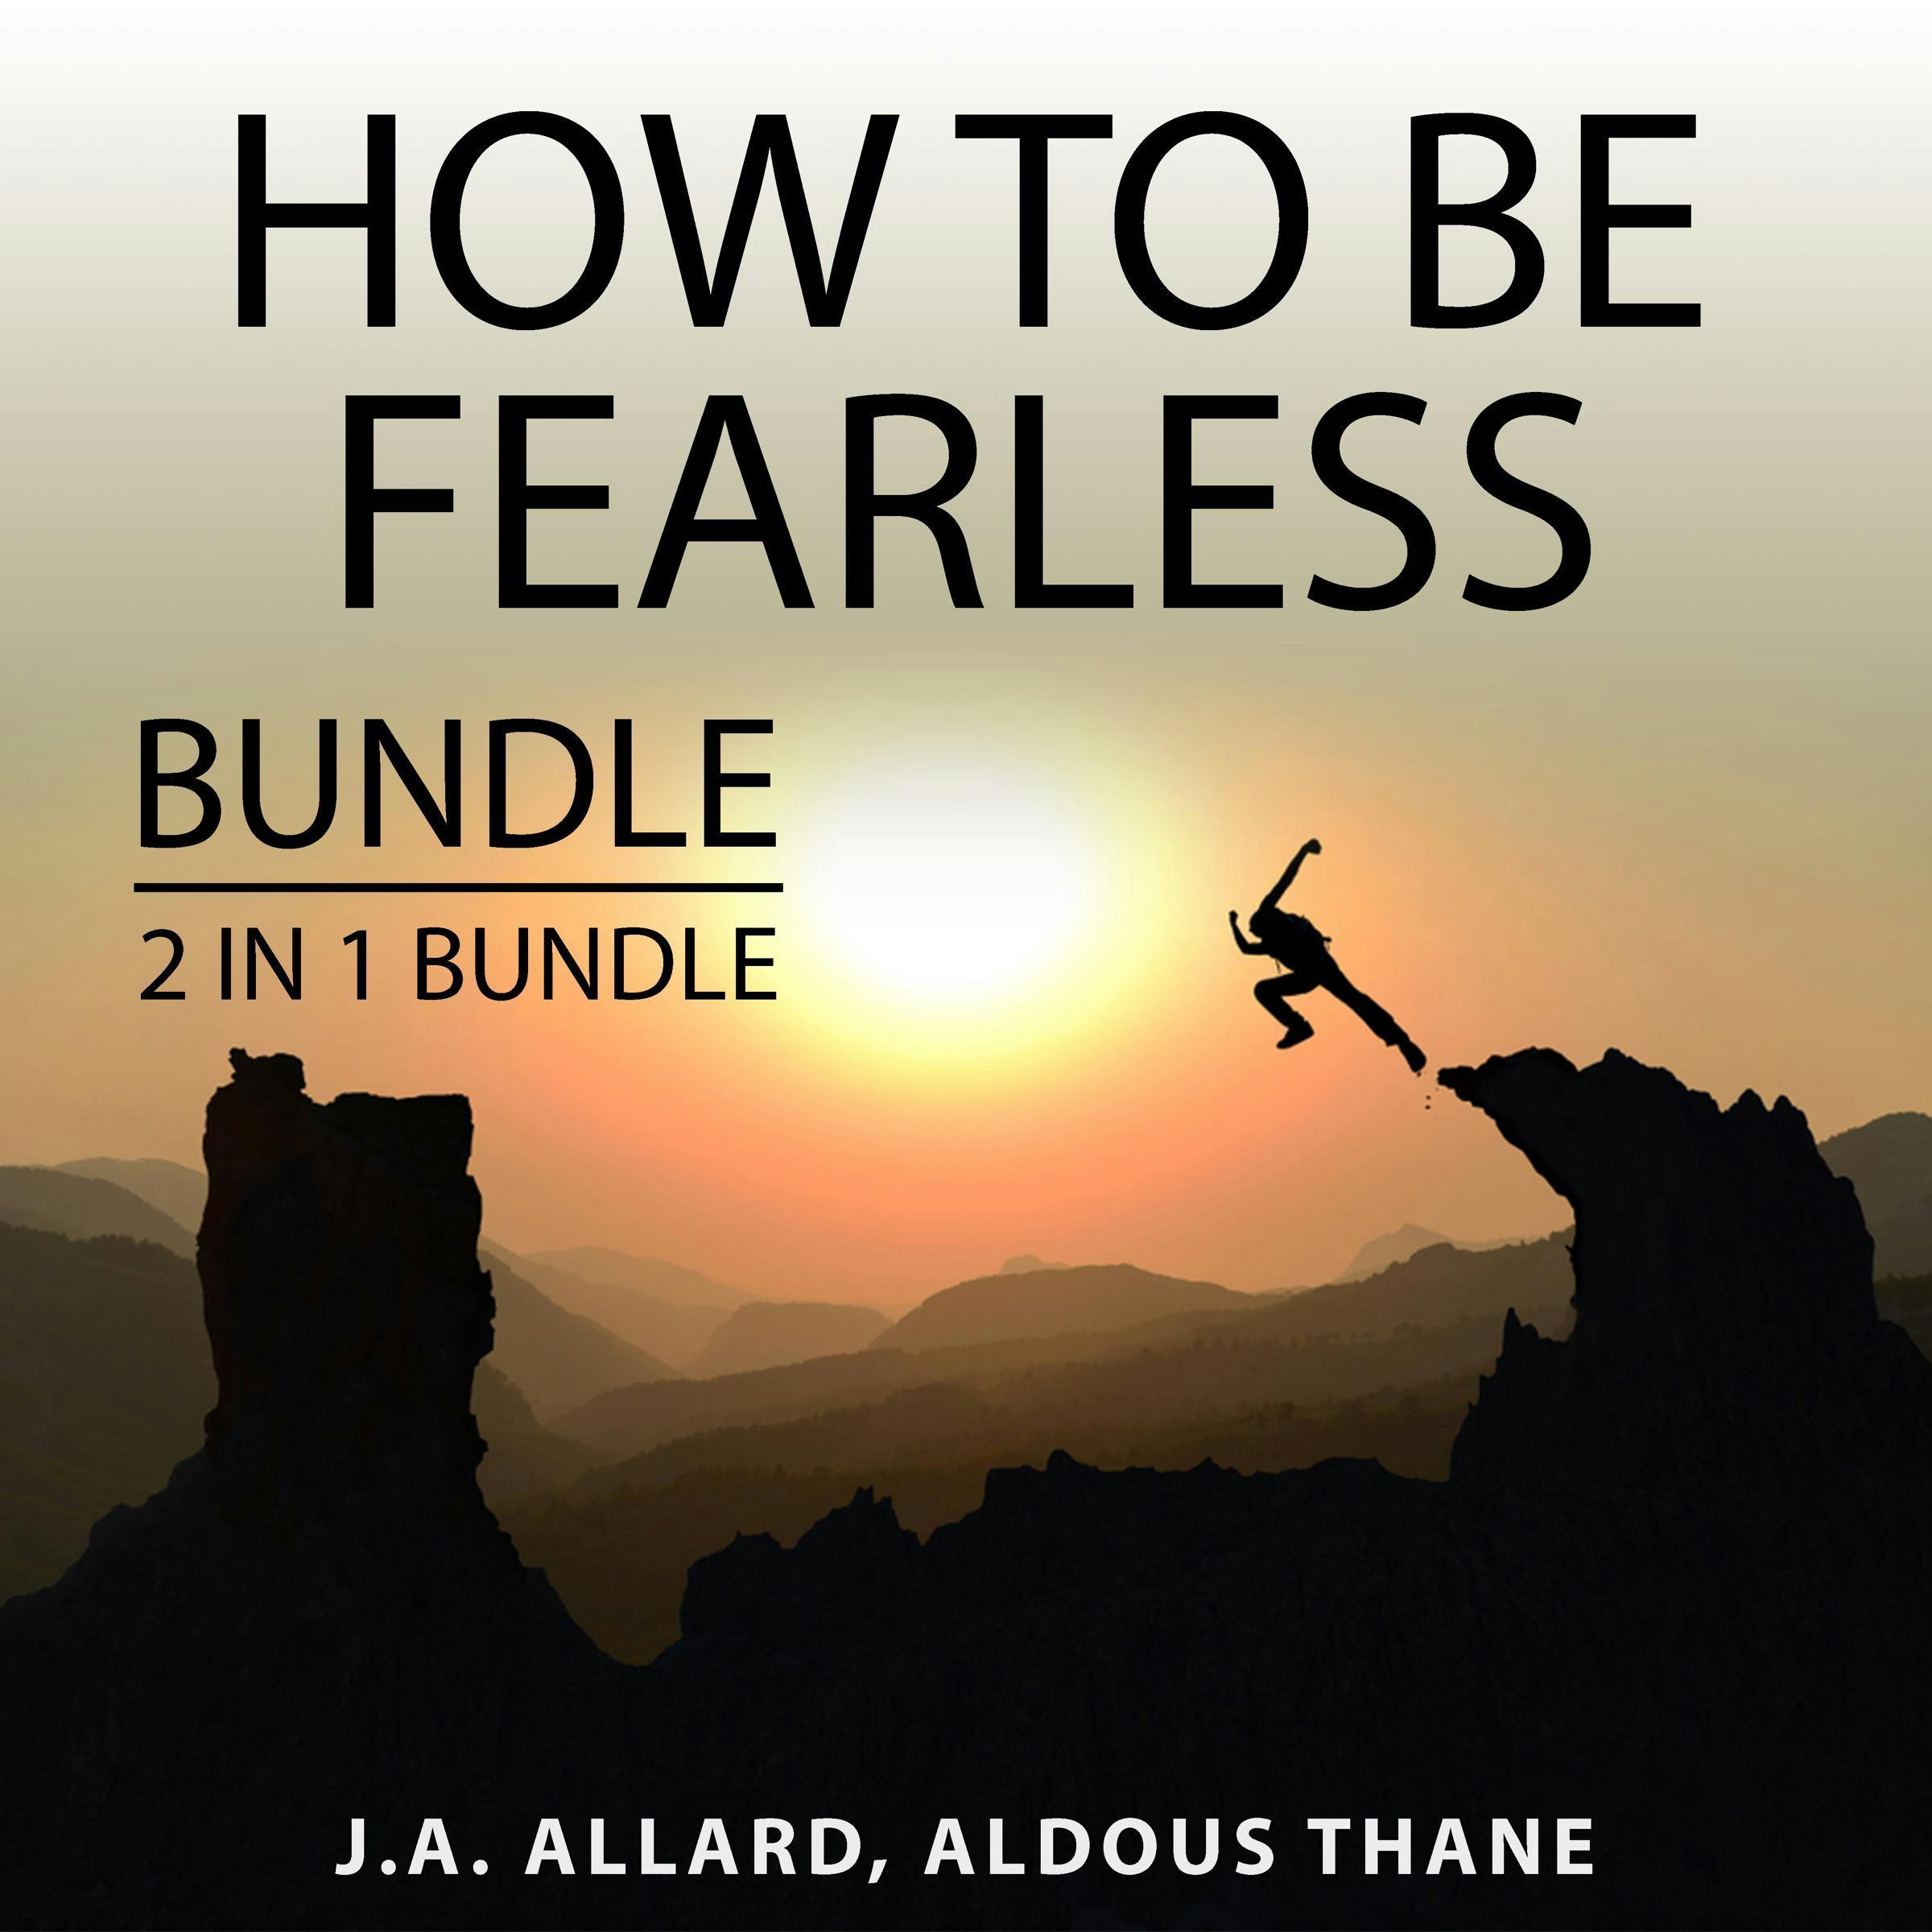 How to Be Fearless Bundle, 2 in 1 Bundle: Do It Scared and The Gift of Fear - J.A. Allard, Aldous Thane